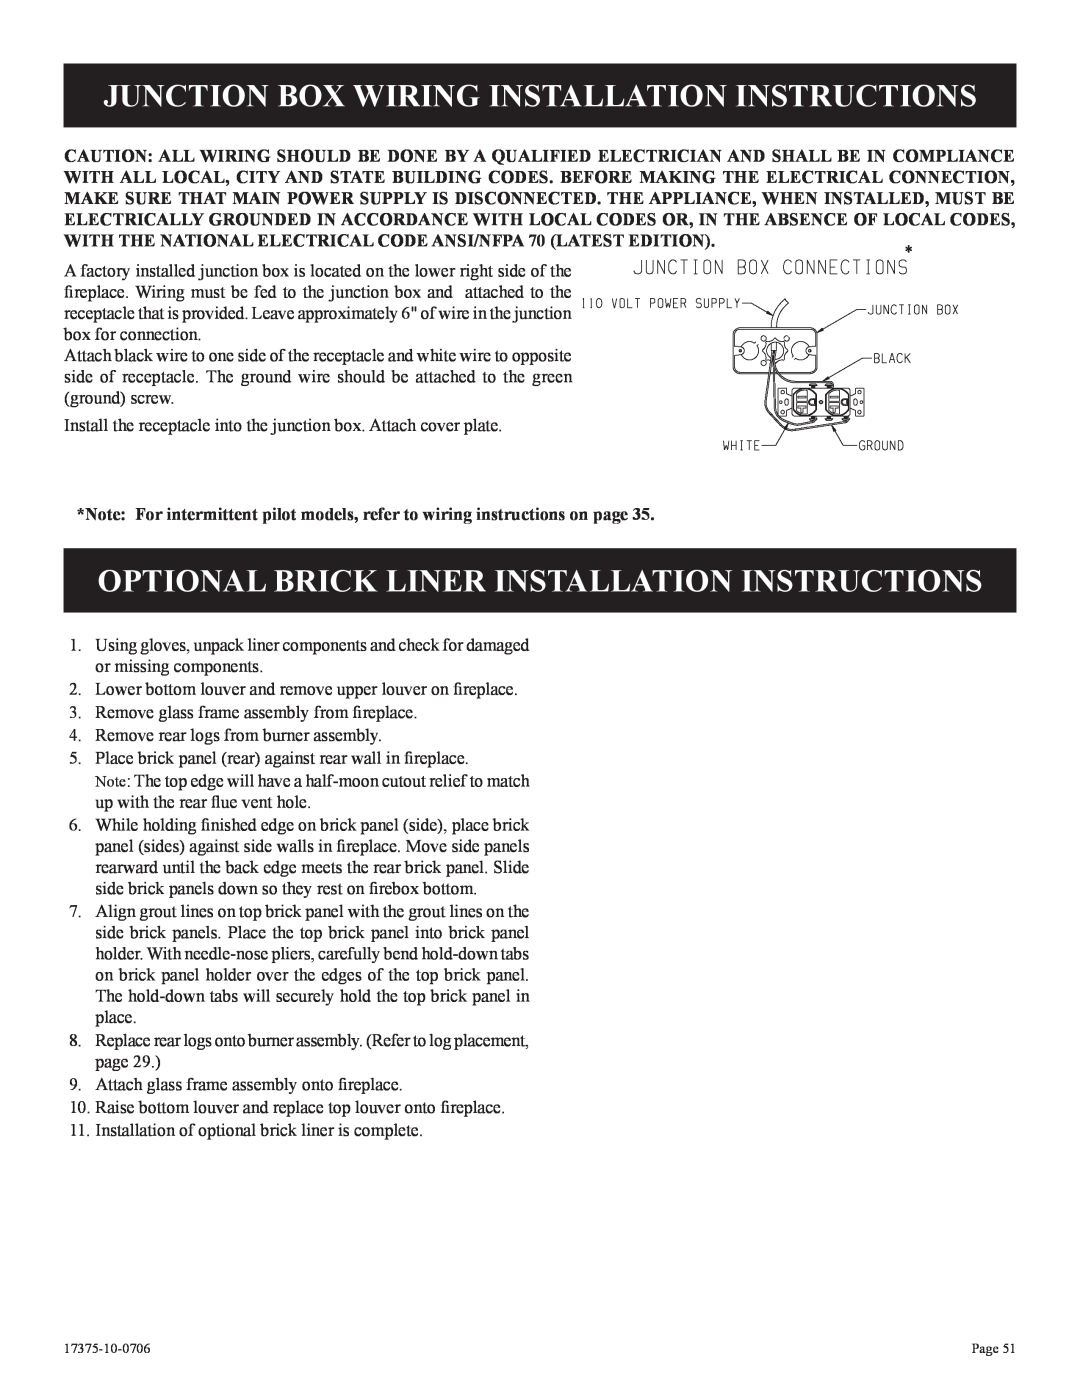 Empire Comfort Systems DVP42FP3(0,1,2,3)(N,P)-1, DVP48FP3(0,1,2,3)(N,P)-1 Junction Box Wiring Installation Instructions 